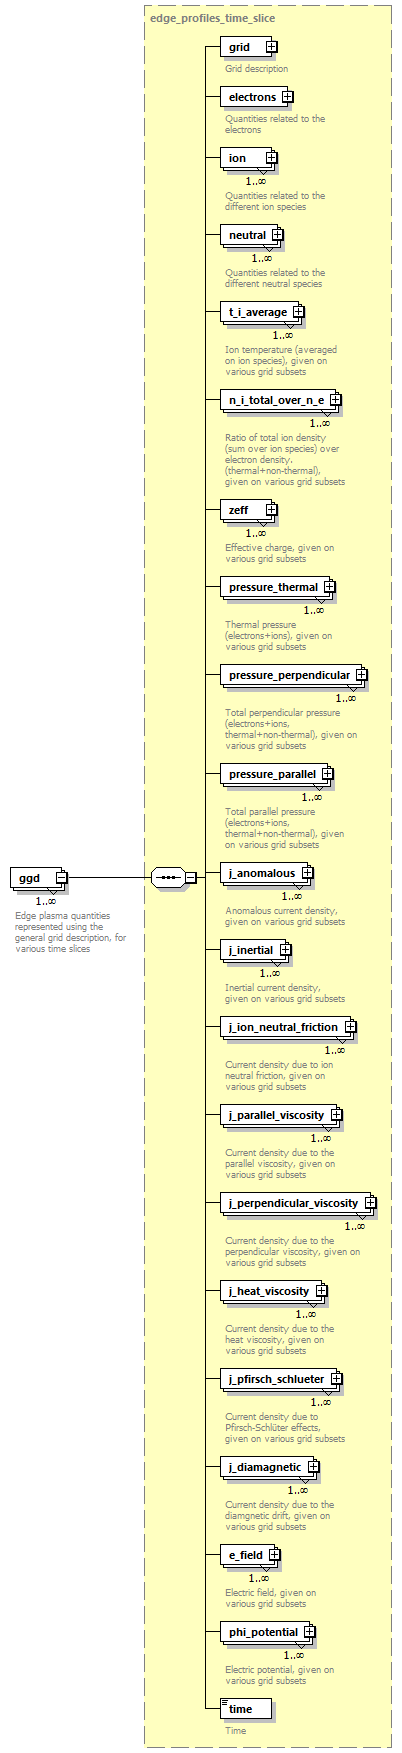 dd_physics_data_dictionary_p1192.png